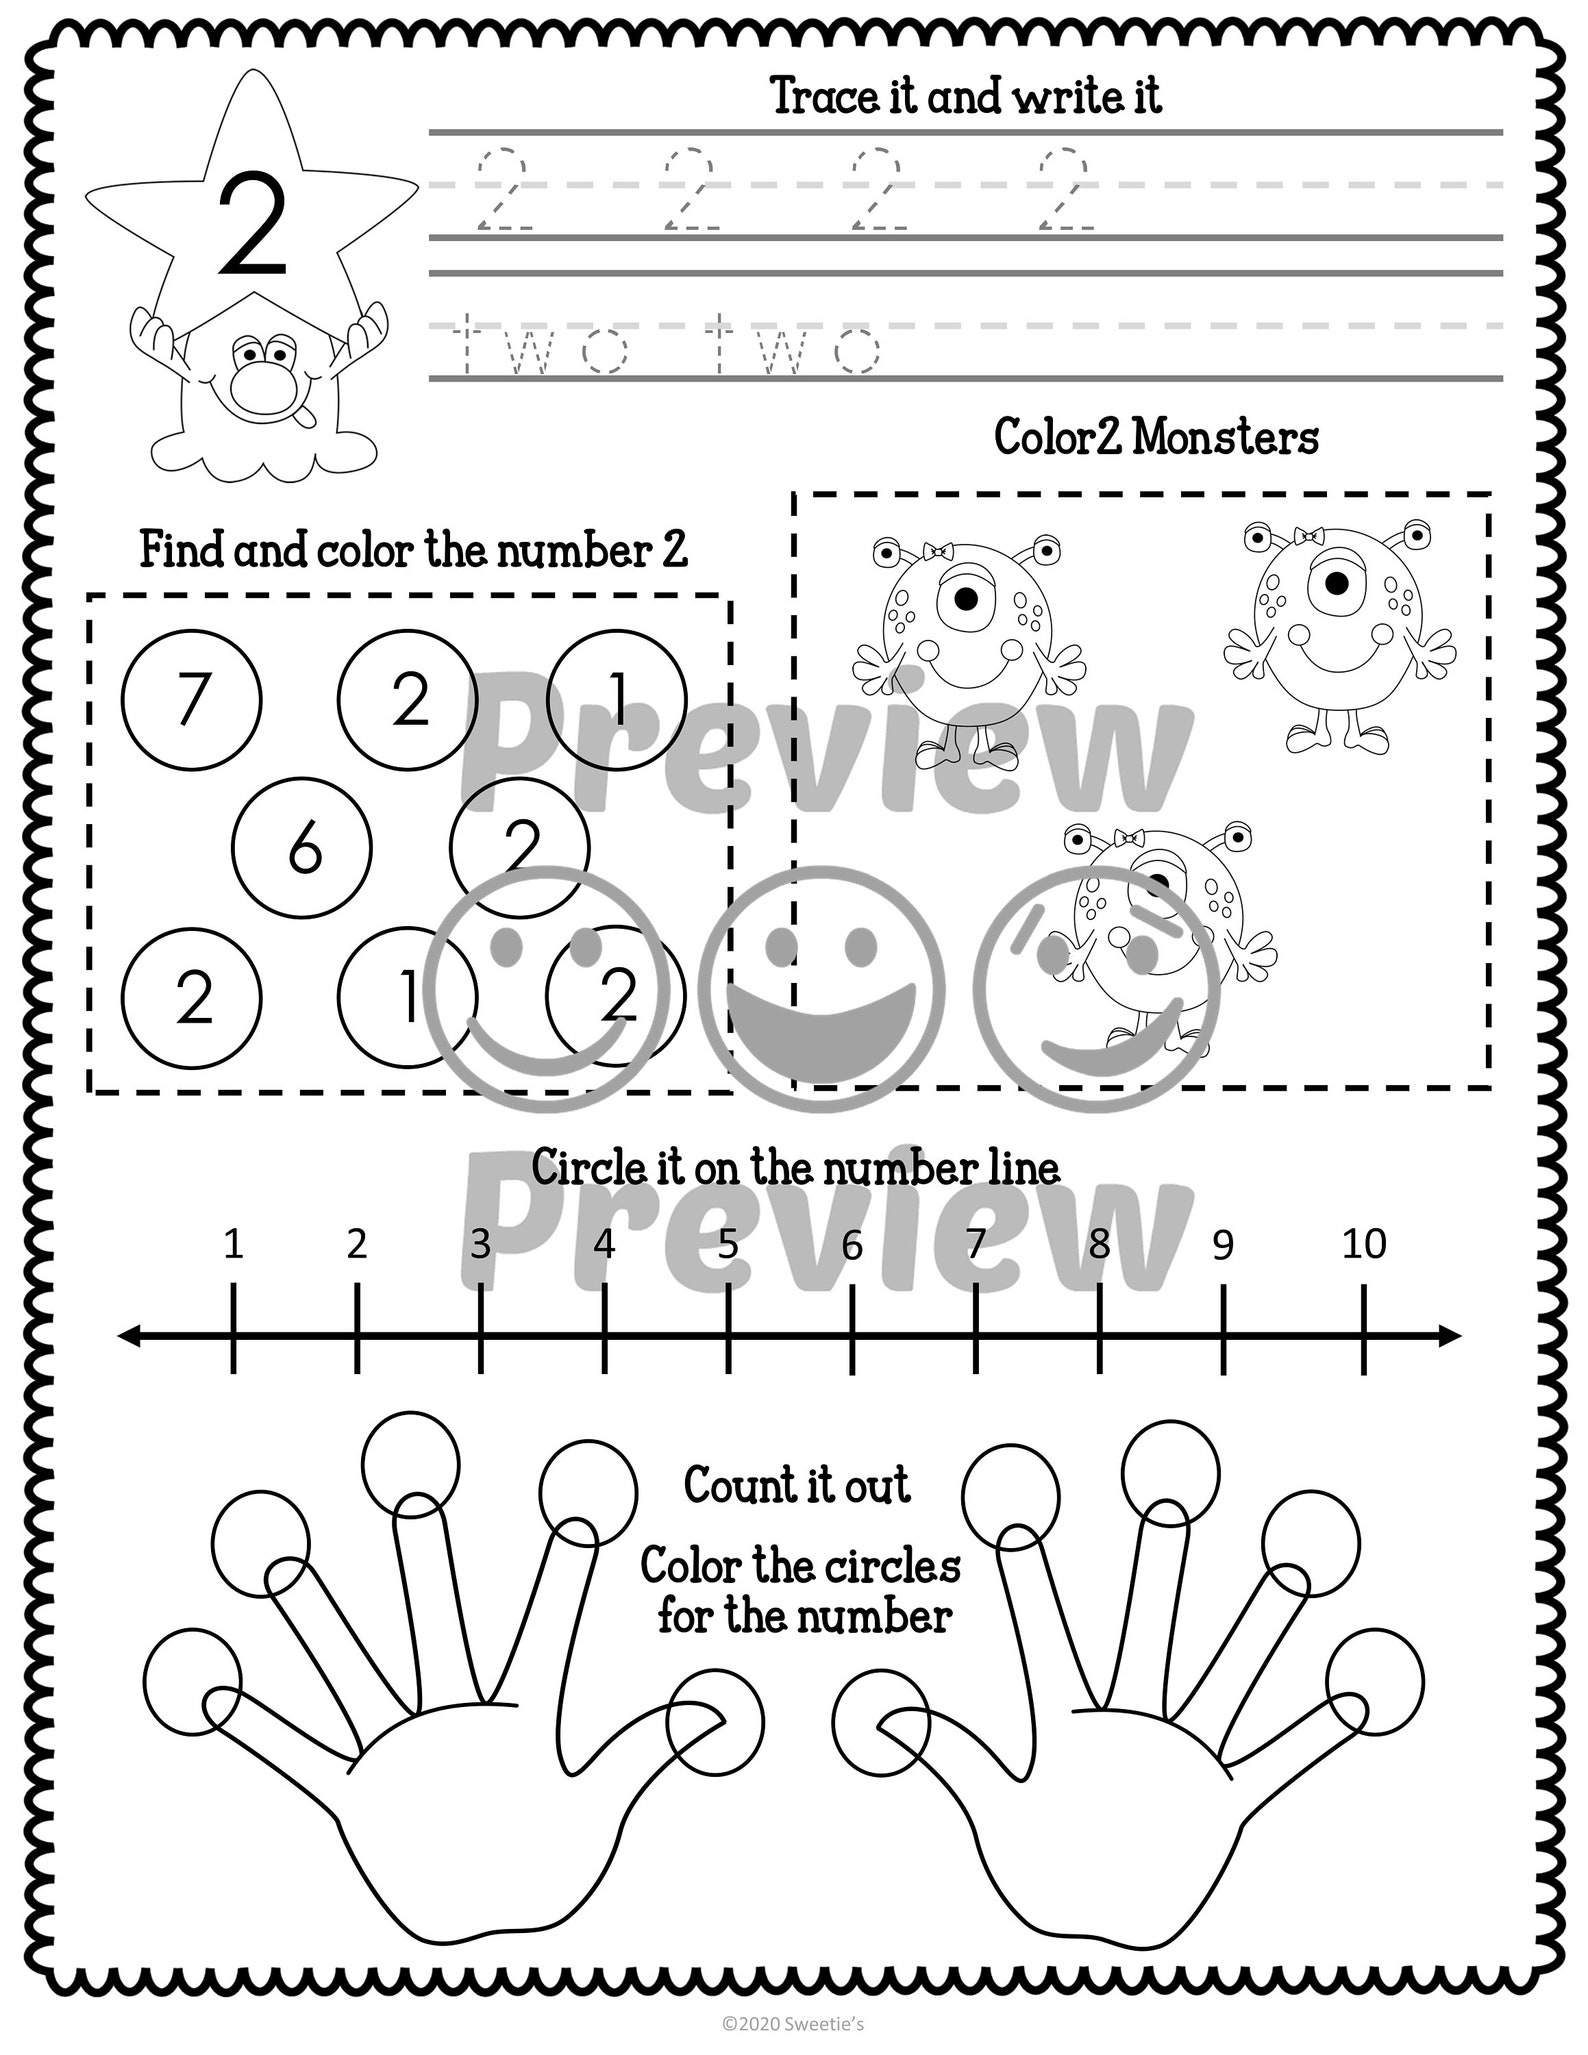 counting-worksheets-preschool-number-worksheets-count-to-10-etsy